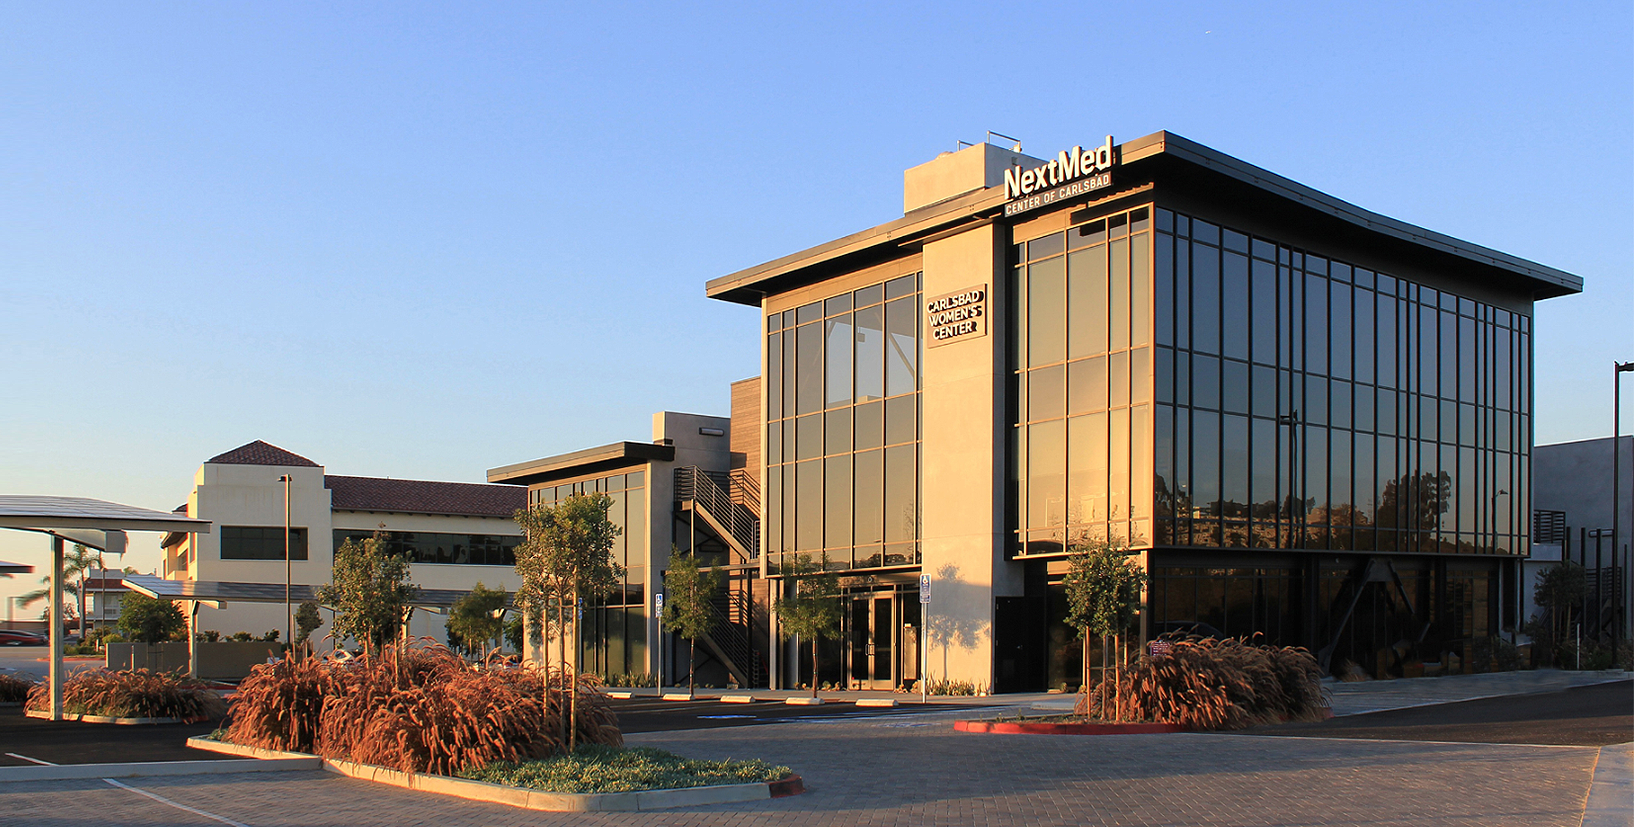 Carlsbad-nextmed-medical-doctor-clinic-med-physician-medcenter-health-center-building-panorama